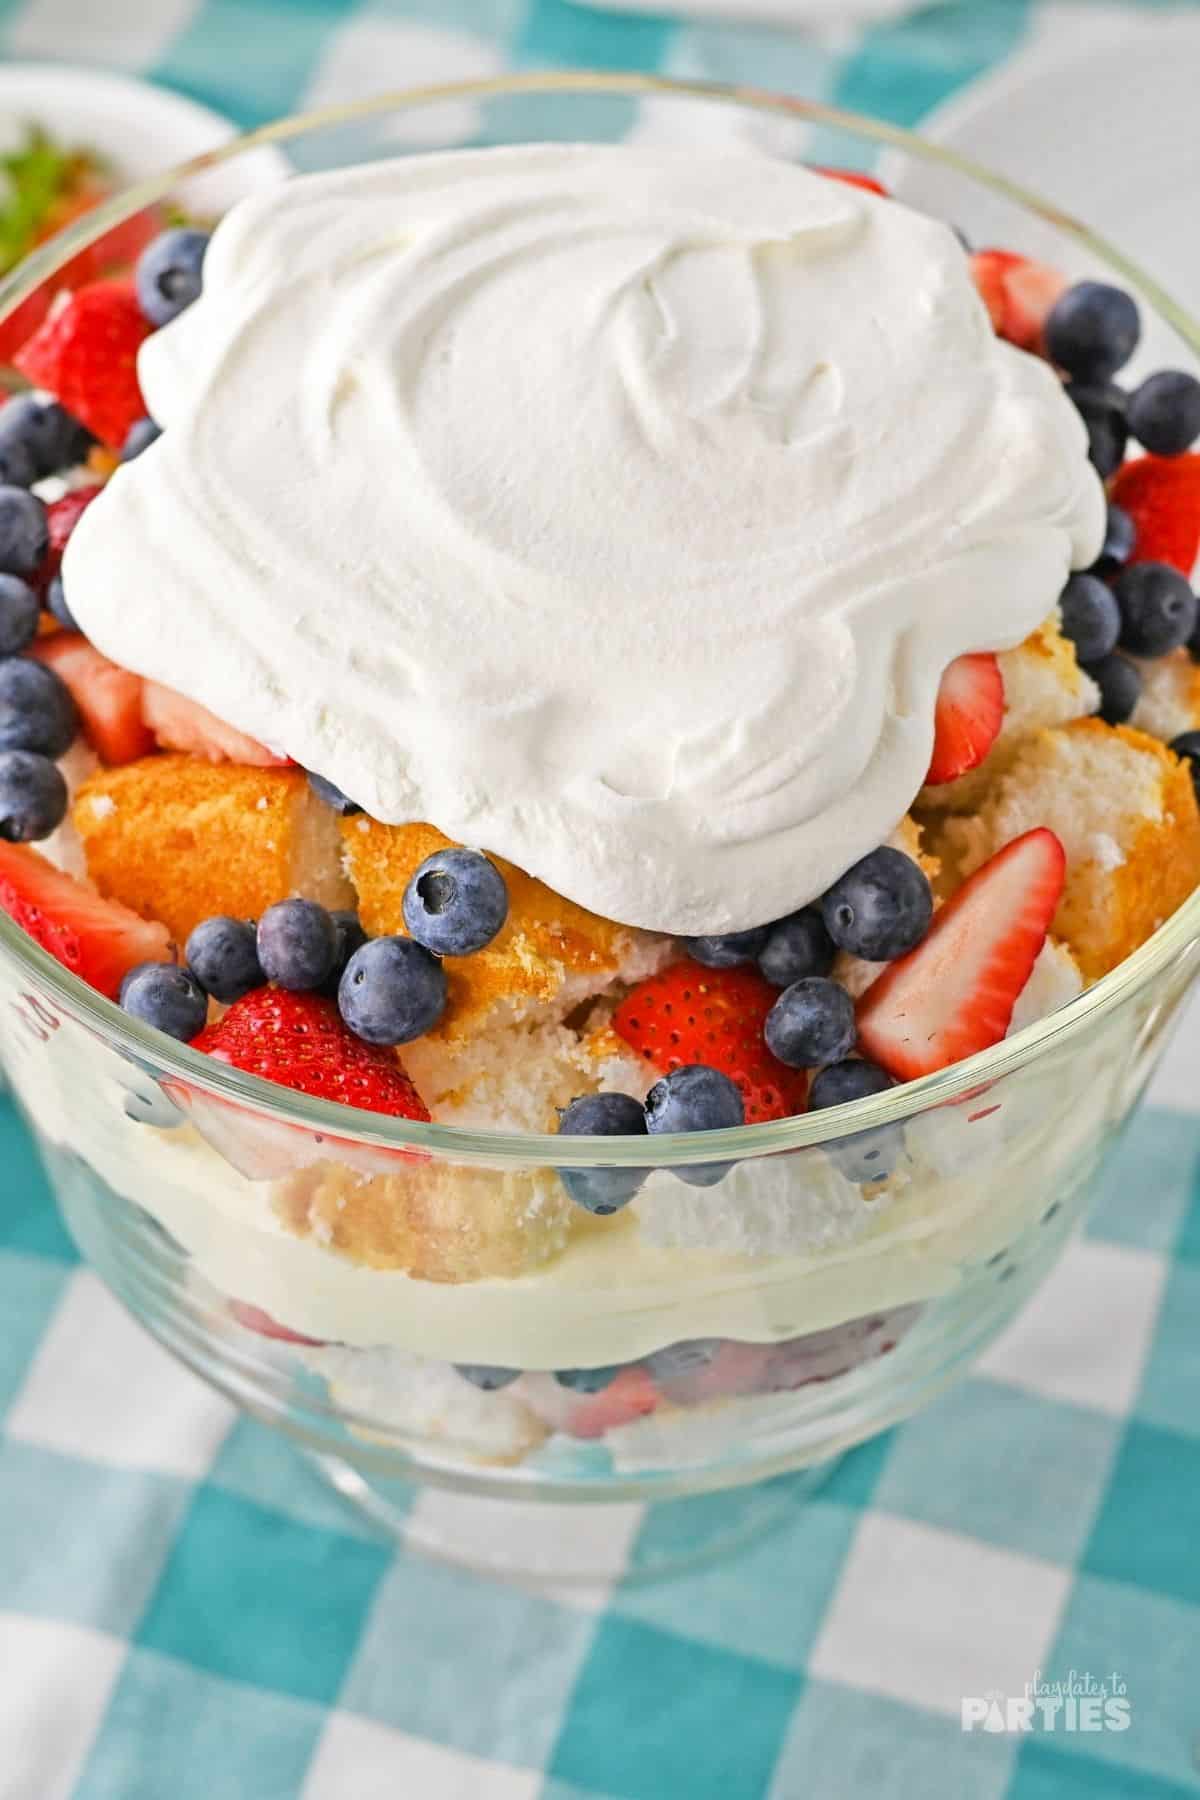 A large pile of whipped cream sits on top of layers of berries, cheesecake pudding mix, and angel food cake.